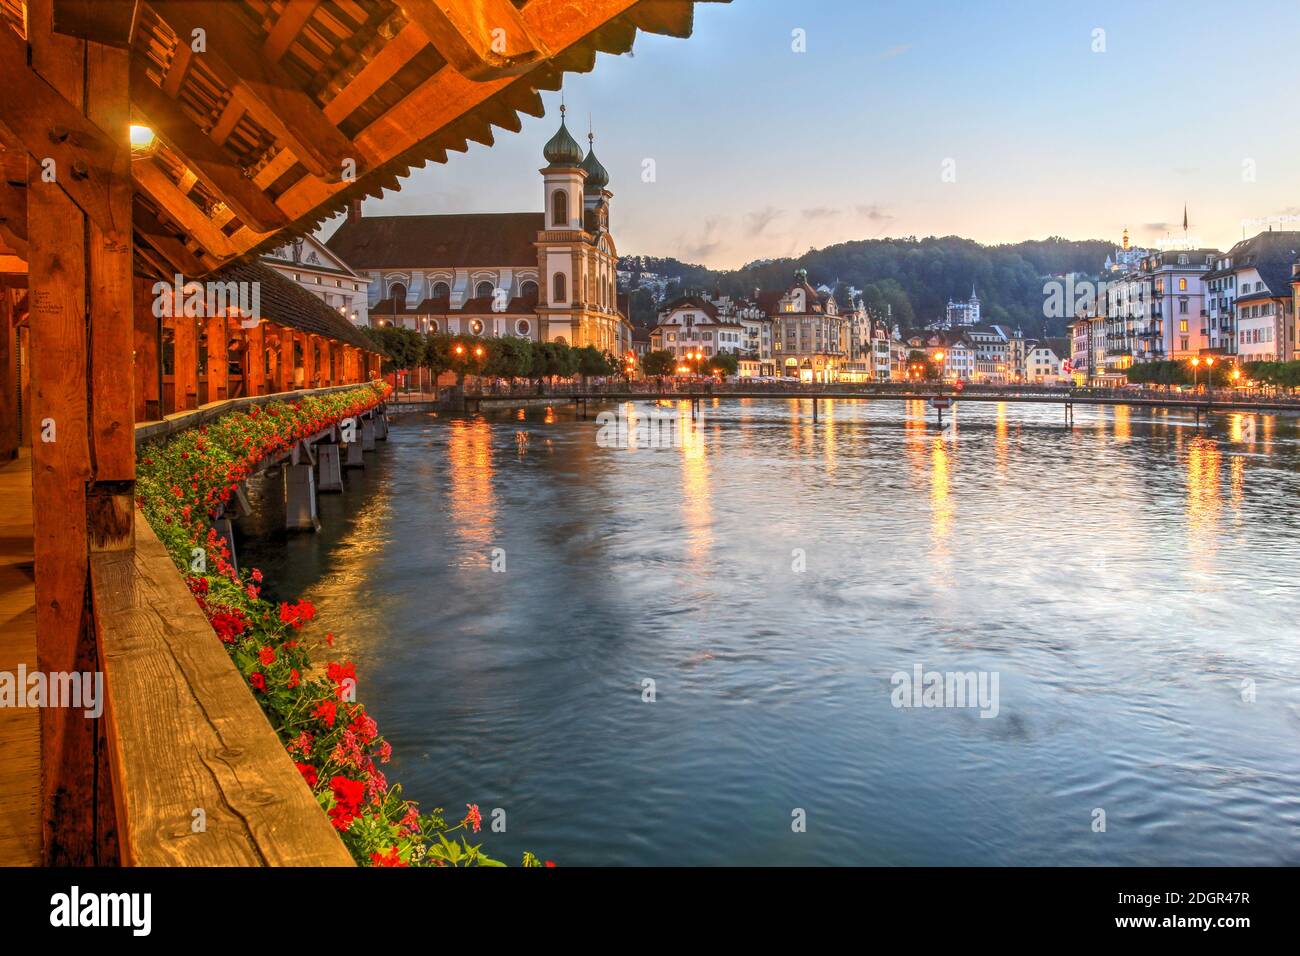 Evening scene from the picturesque Chapel Bridge over the Reuss River with the Luzern Jesuit Church and the riverfront, Lucerne, Switzerland. Stock Photo